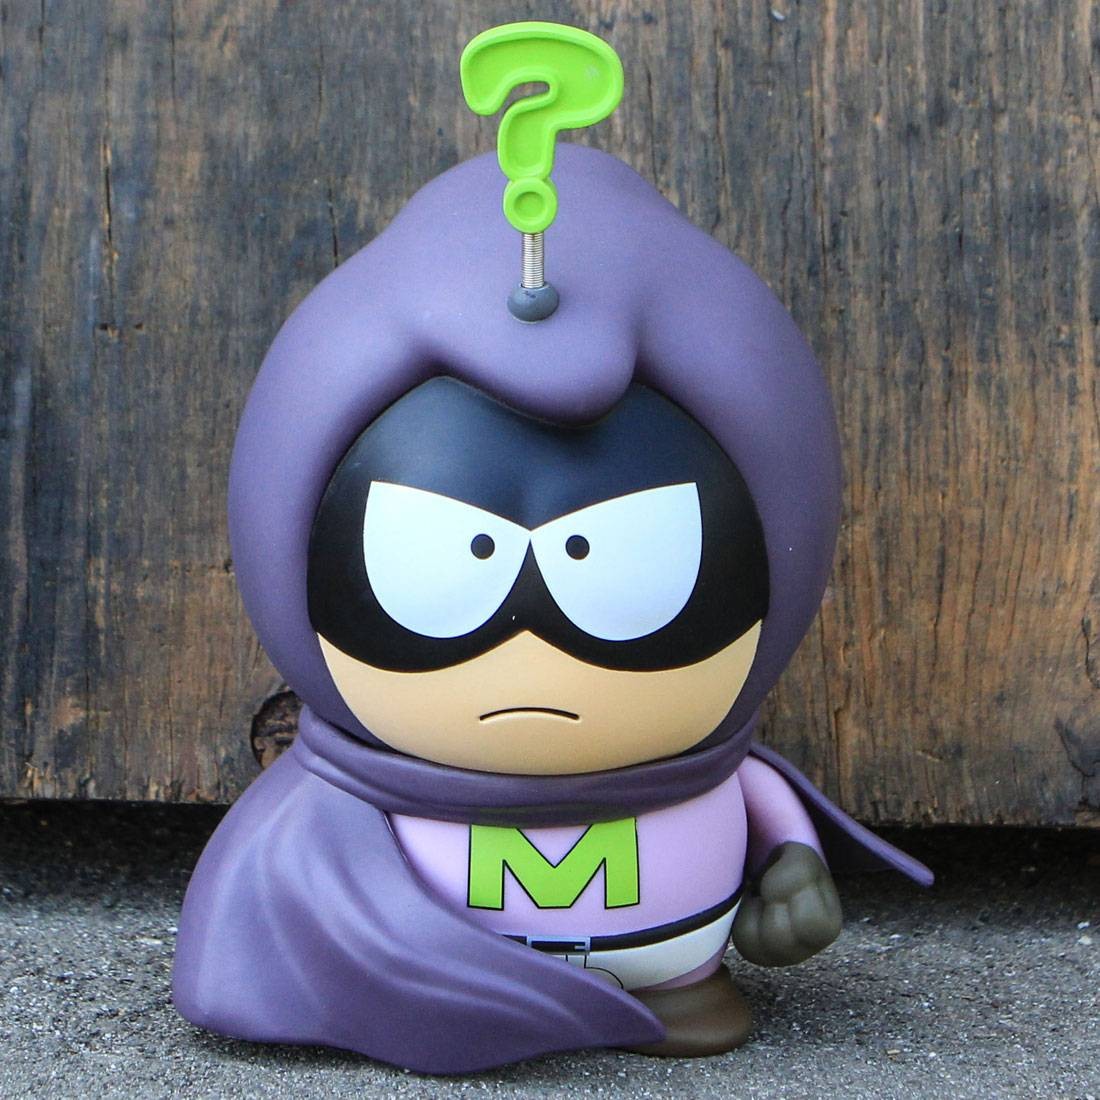 Kidrobot x South Park The Fractured But Whole Mysterion 7 Inch Medium Figure (purple)